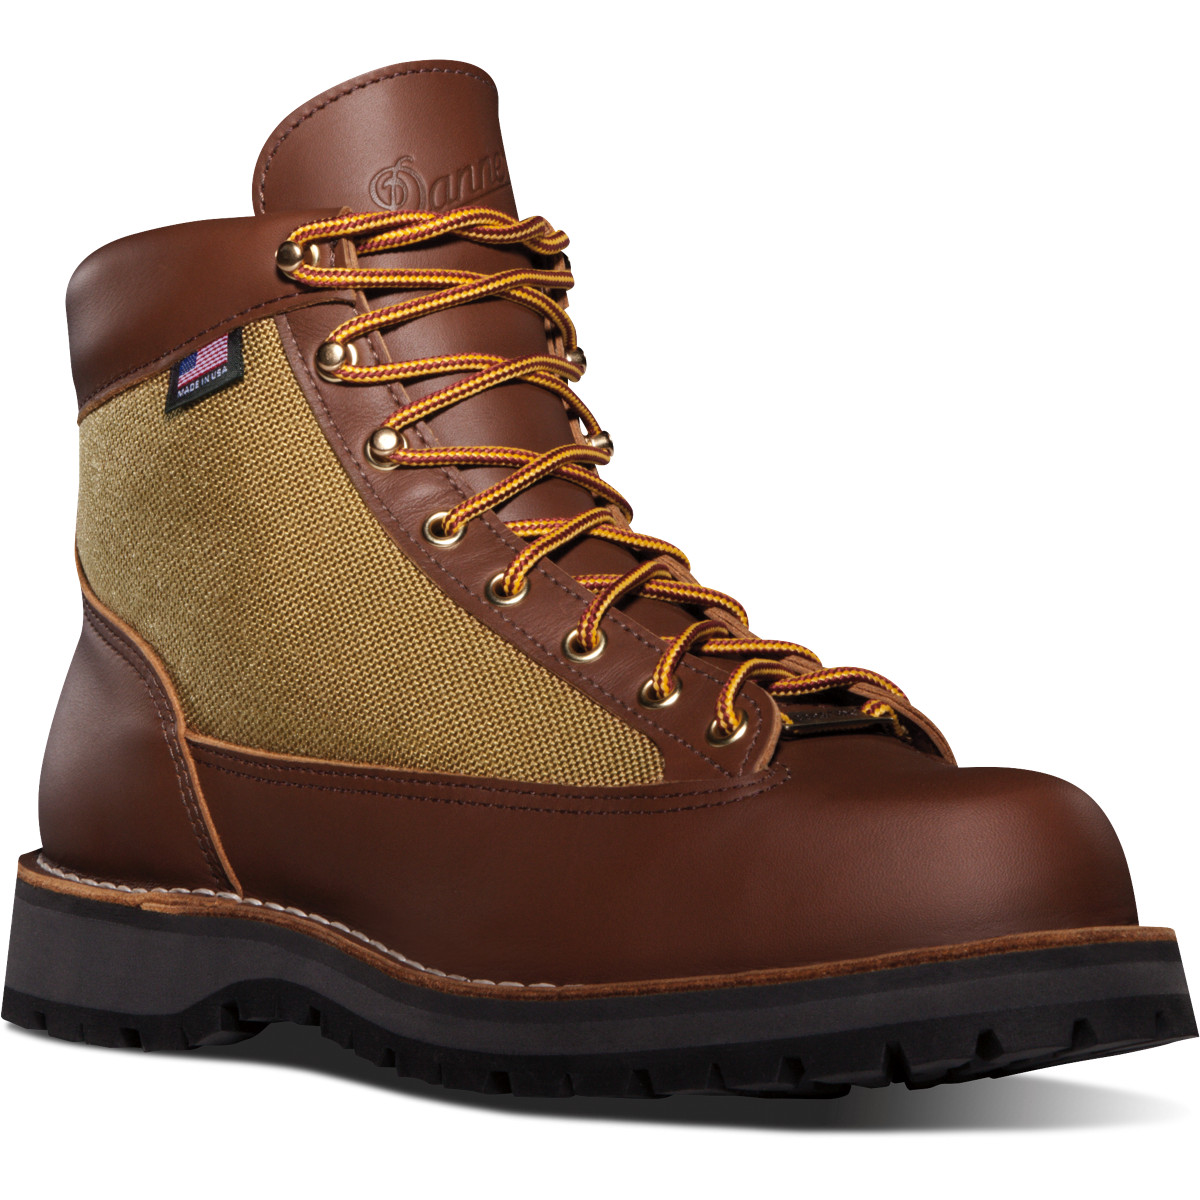 Danner Mens Light Hiking Boots Brown - OVY653817